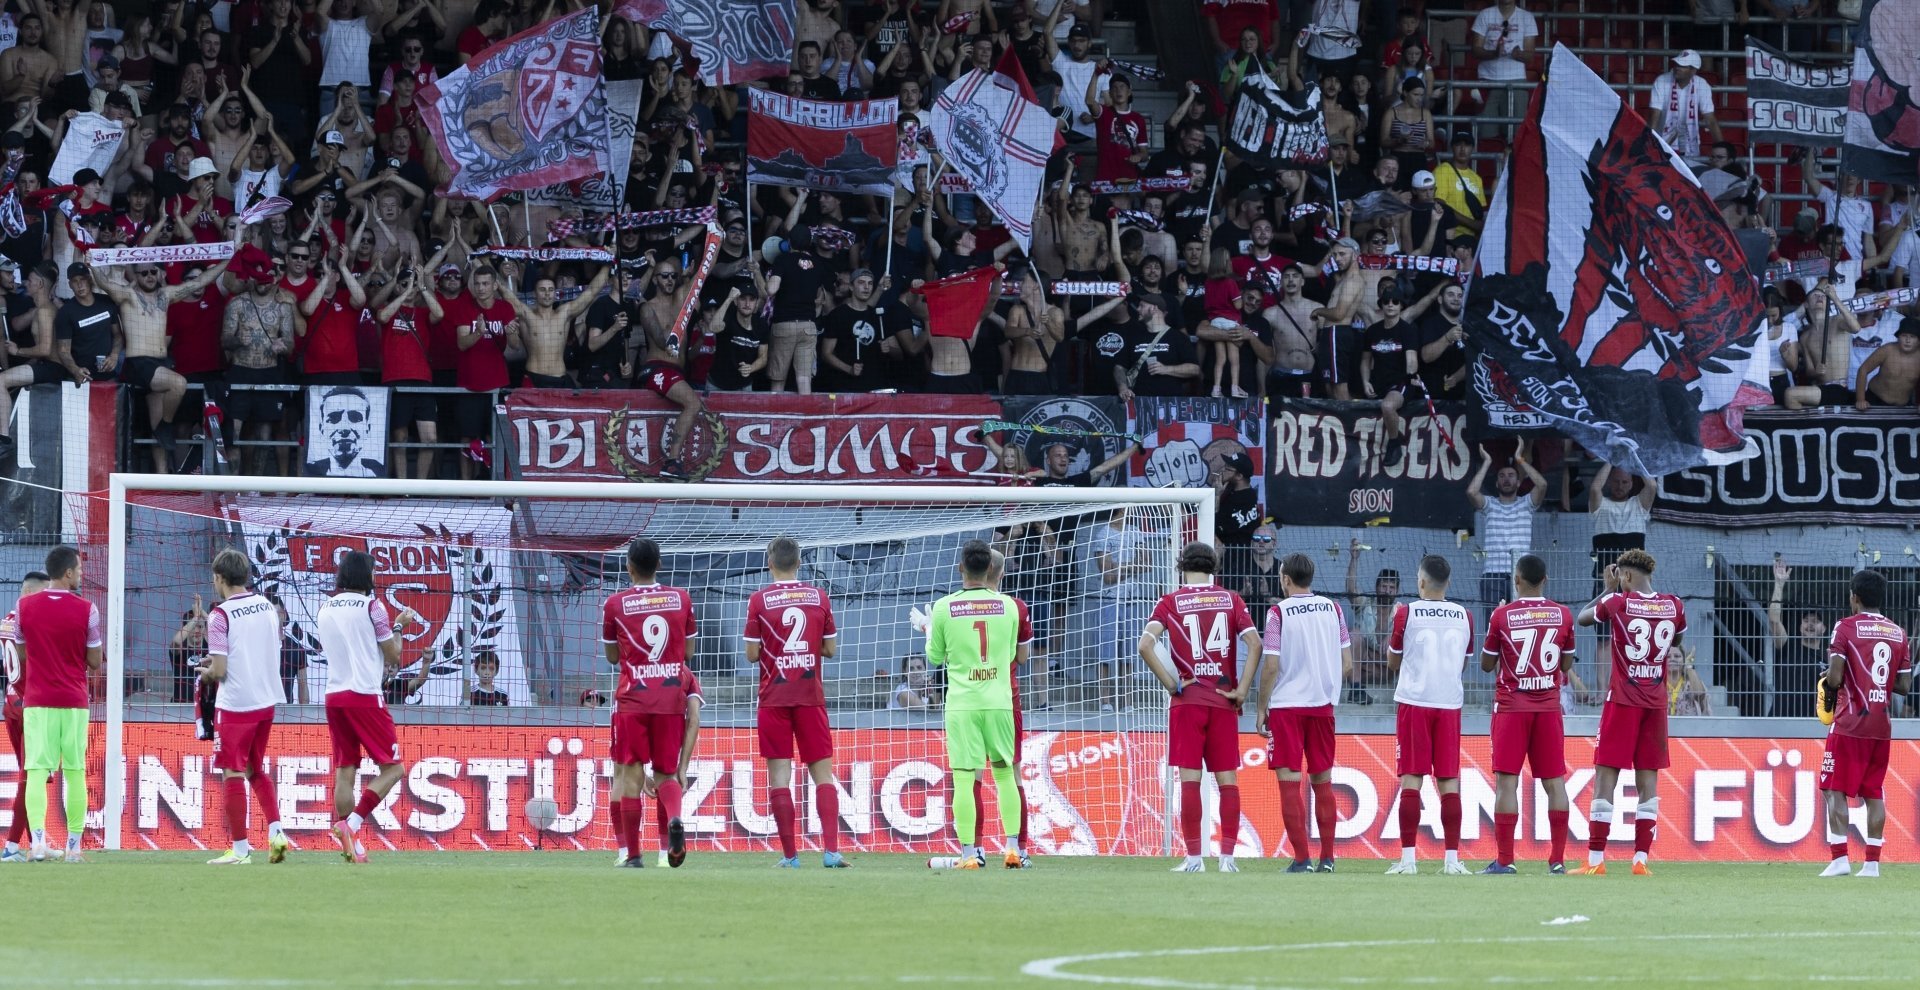 Sion's players greet their supporters, after the Super League soccer match of Swiss Championship between FC Sion and Grasshopper Club Zuerich, at the Stade de Tourbillon stadium, in Sion, Switzerland, Saturday, August 13, 2022. (KEYSTONE/Salvatore Di Nolfi)